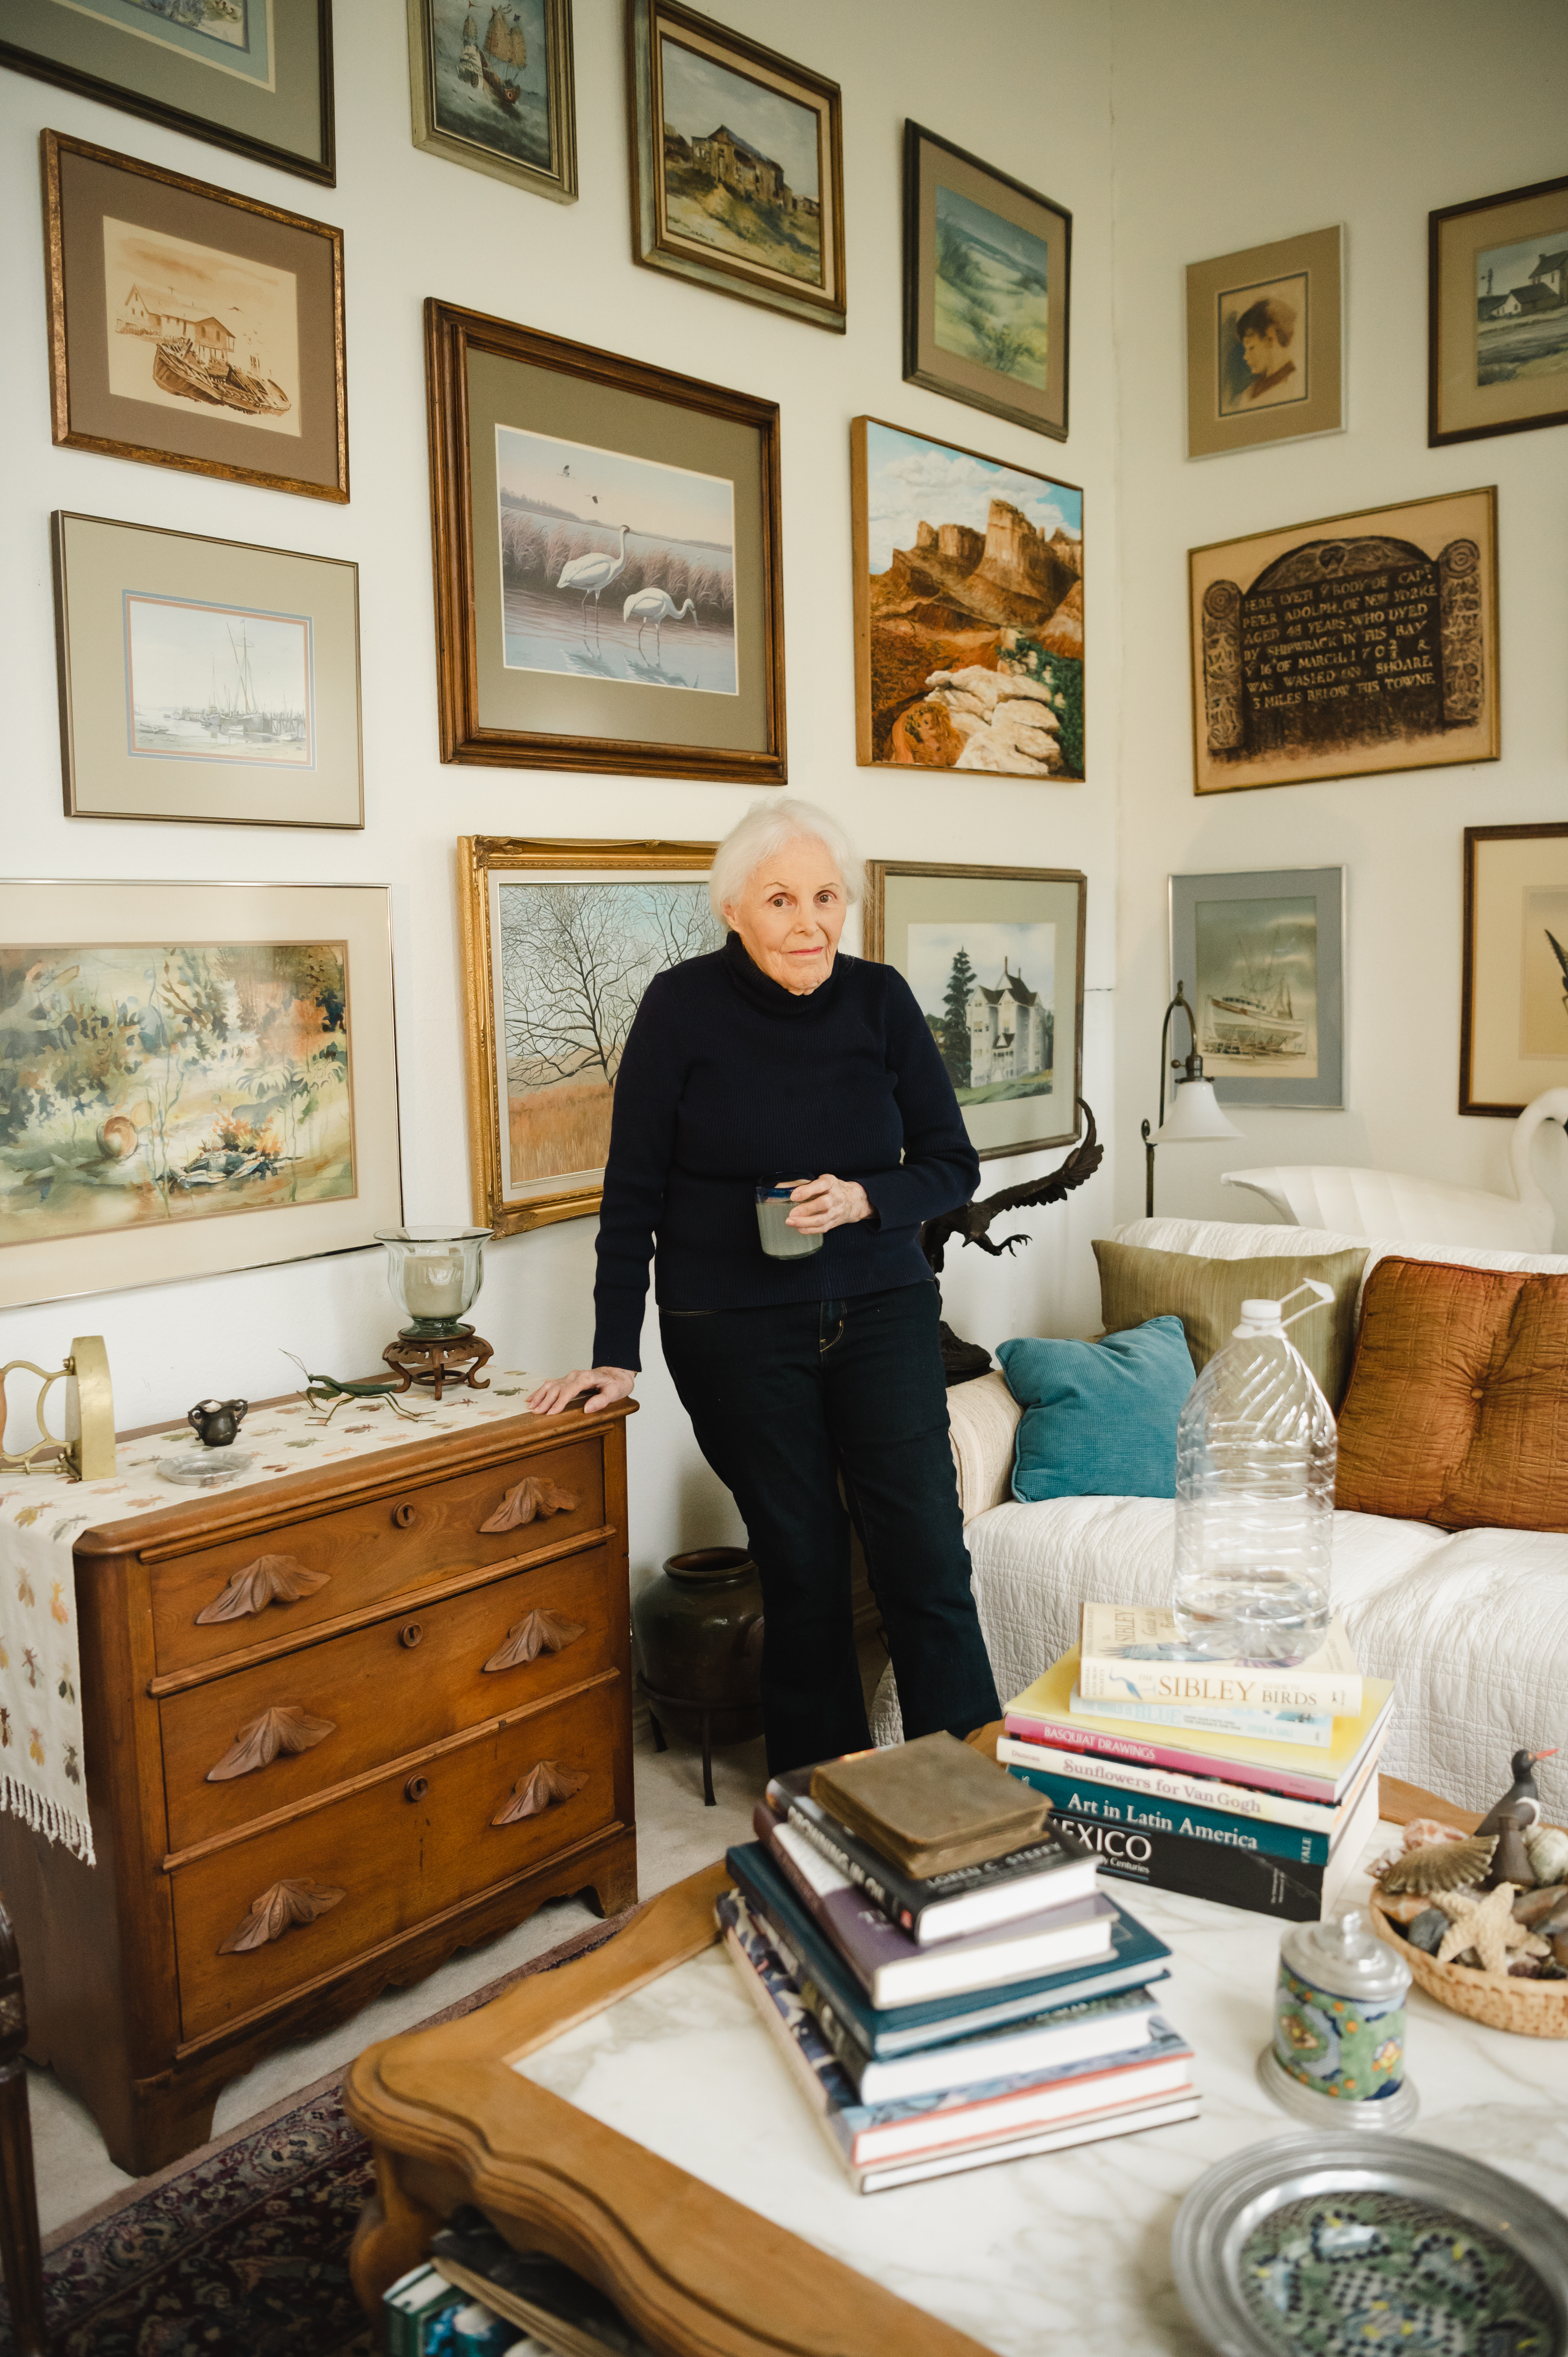 A white haired, elderly white woman poses with a mug in one hand, the other leaning on a dresser in a living room area, the wall covered in framed nature photographs. It's a cozy space, with books and pillows.